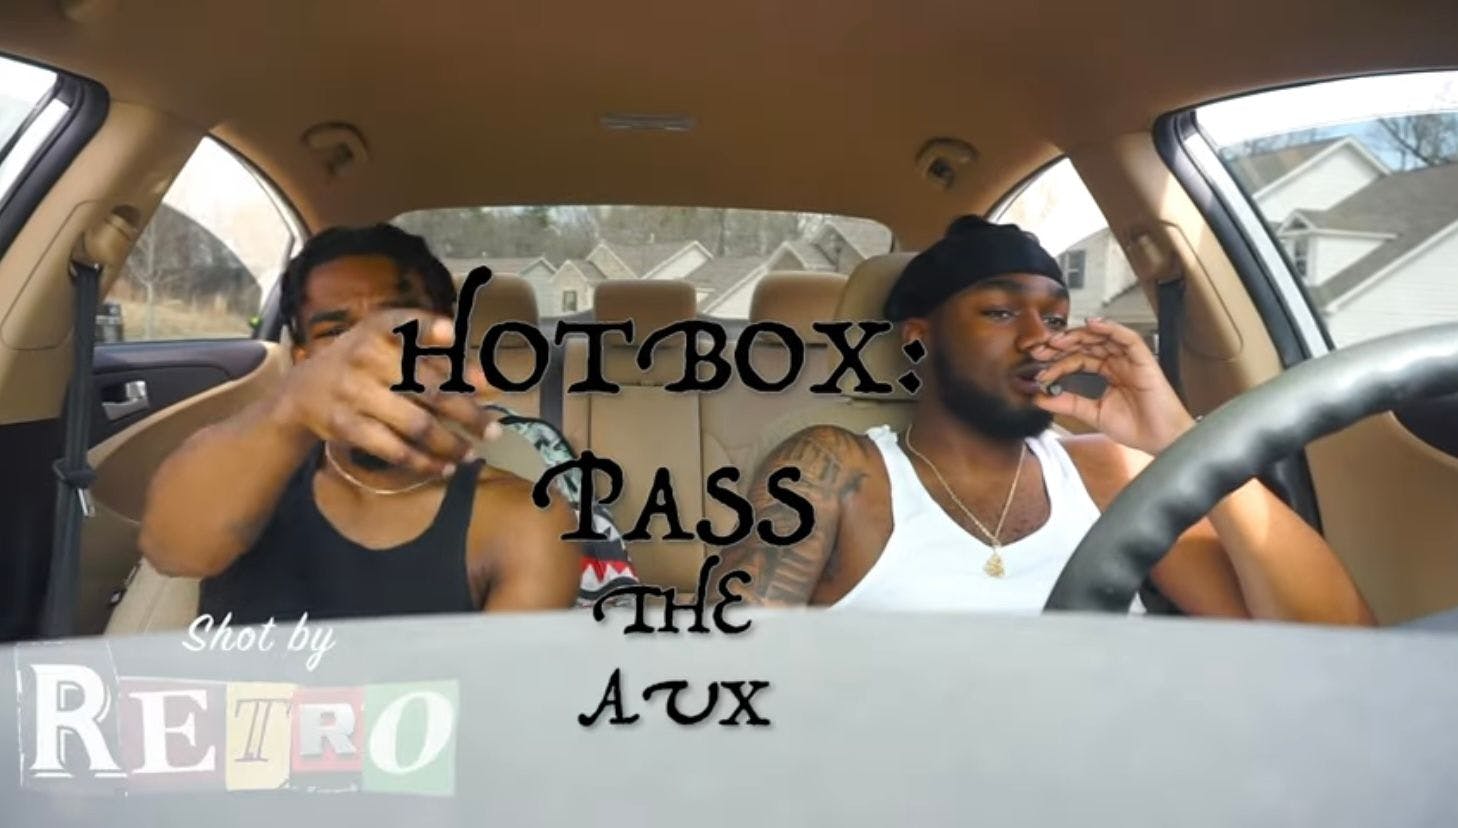 Pass the Aux ft. Juantoven (Shot by Retro) Banner Image